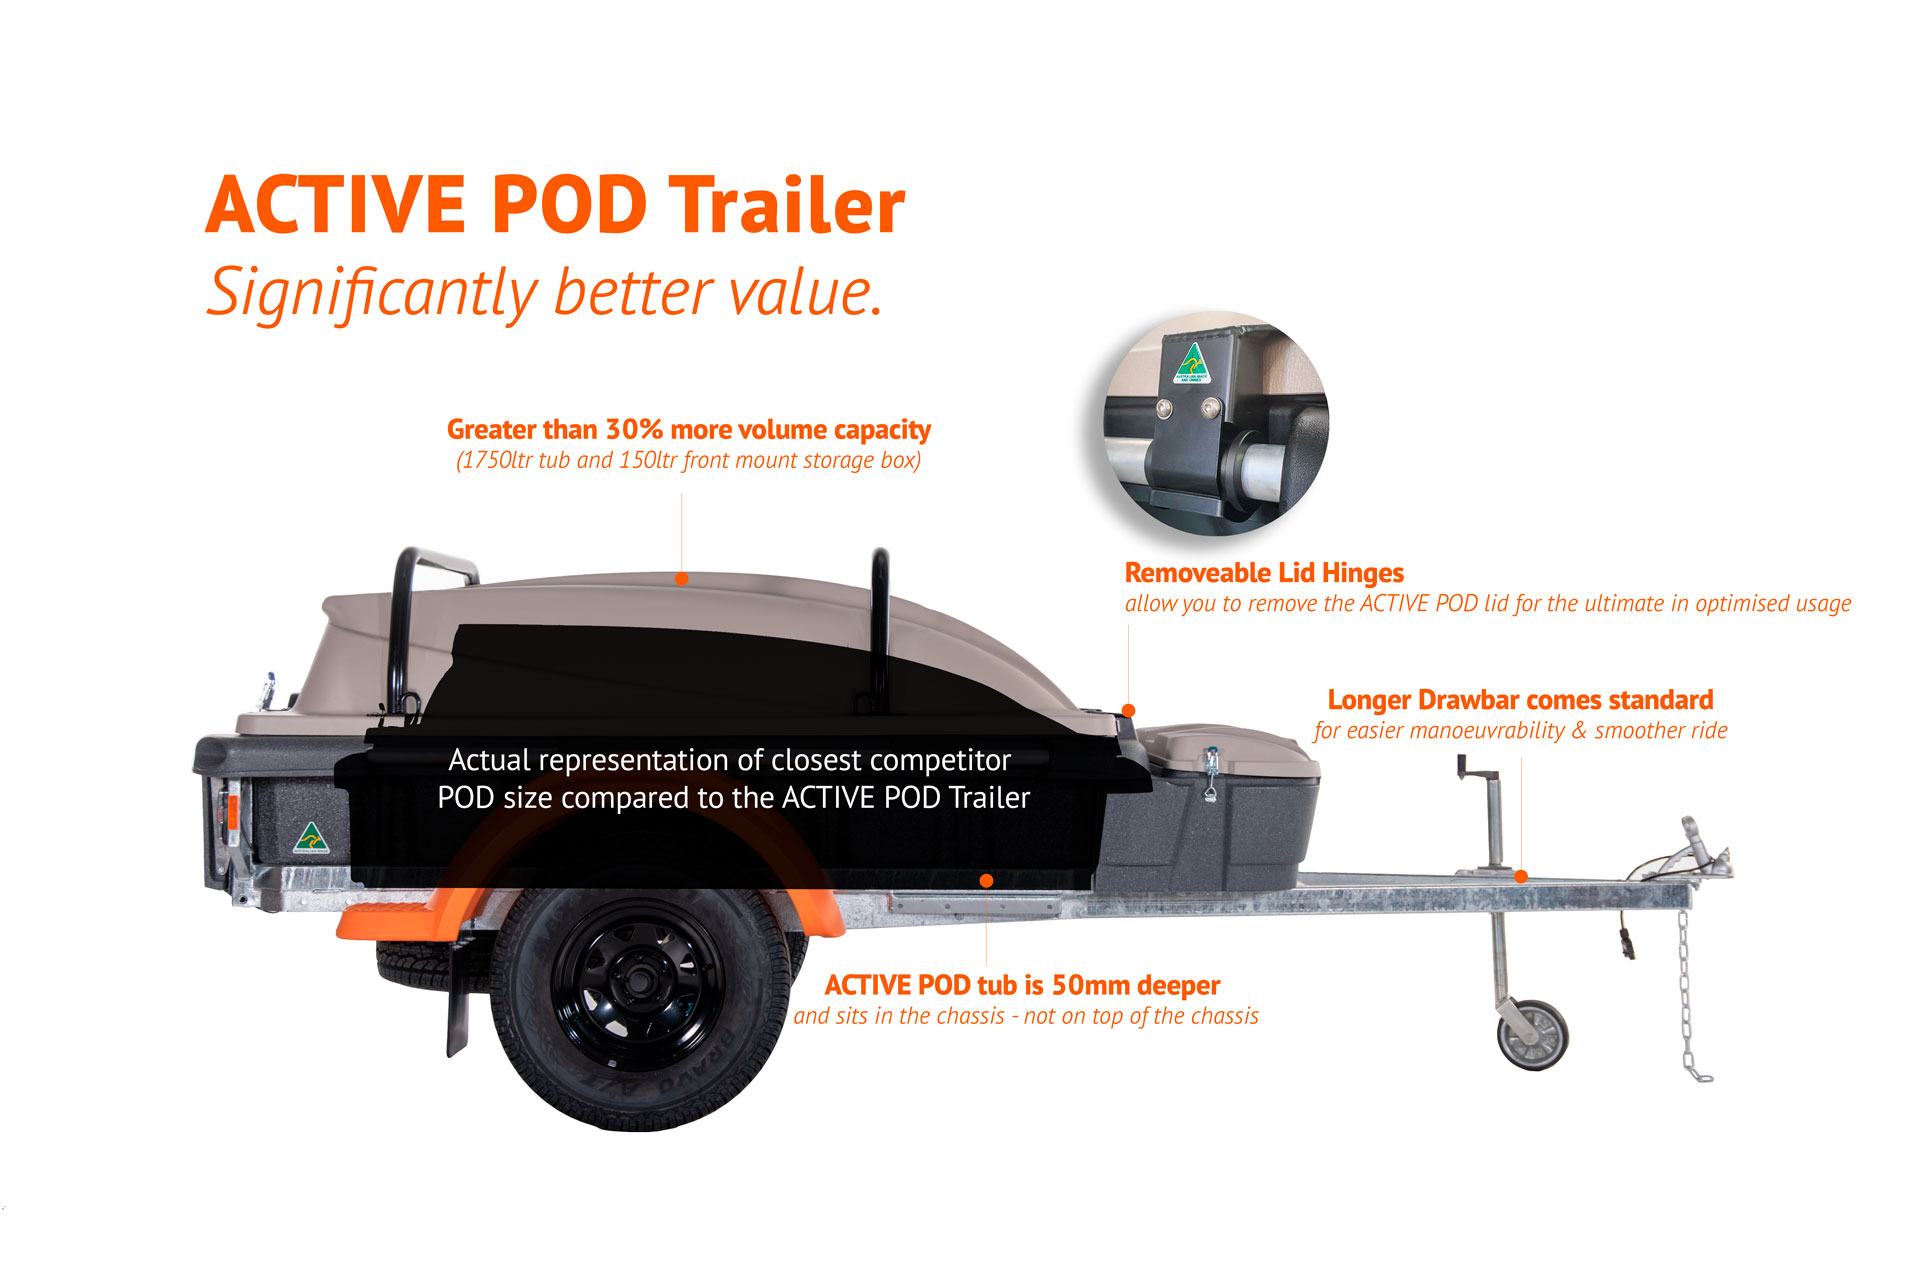 Trailmaster features more with POD Trailer